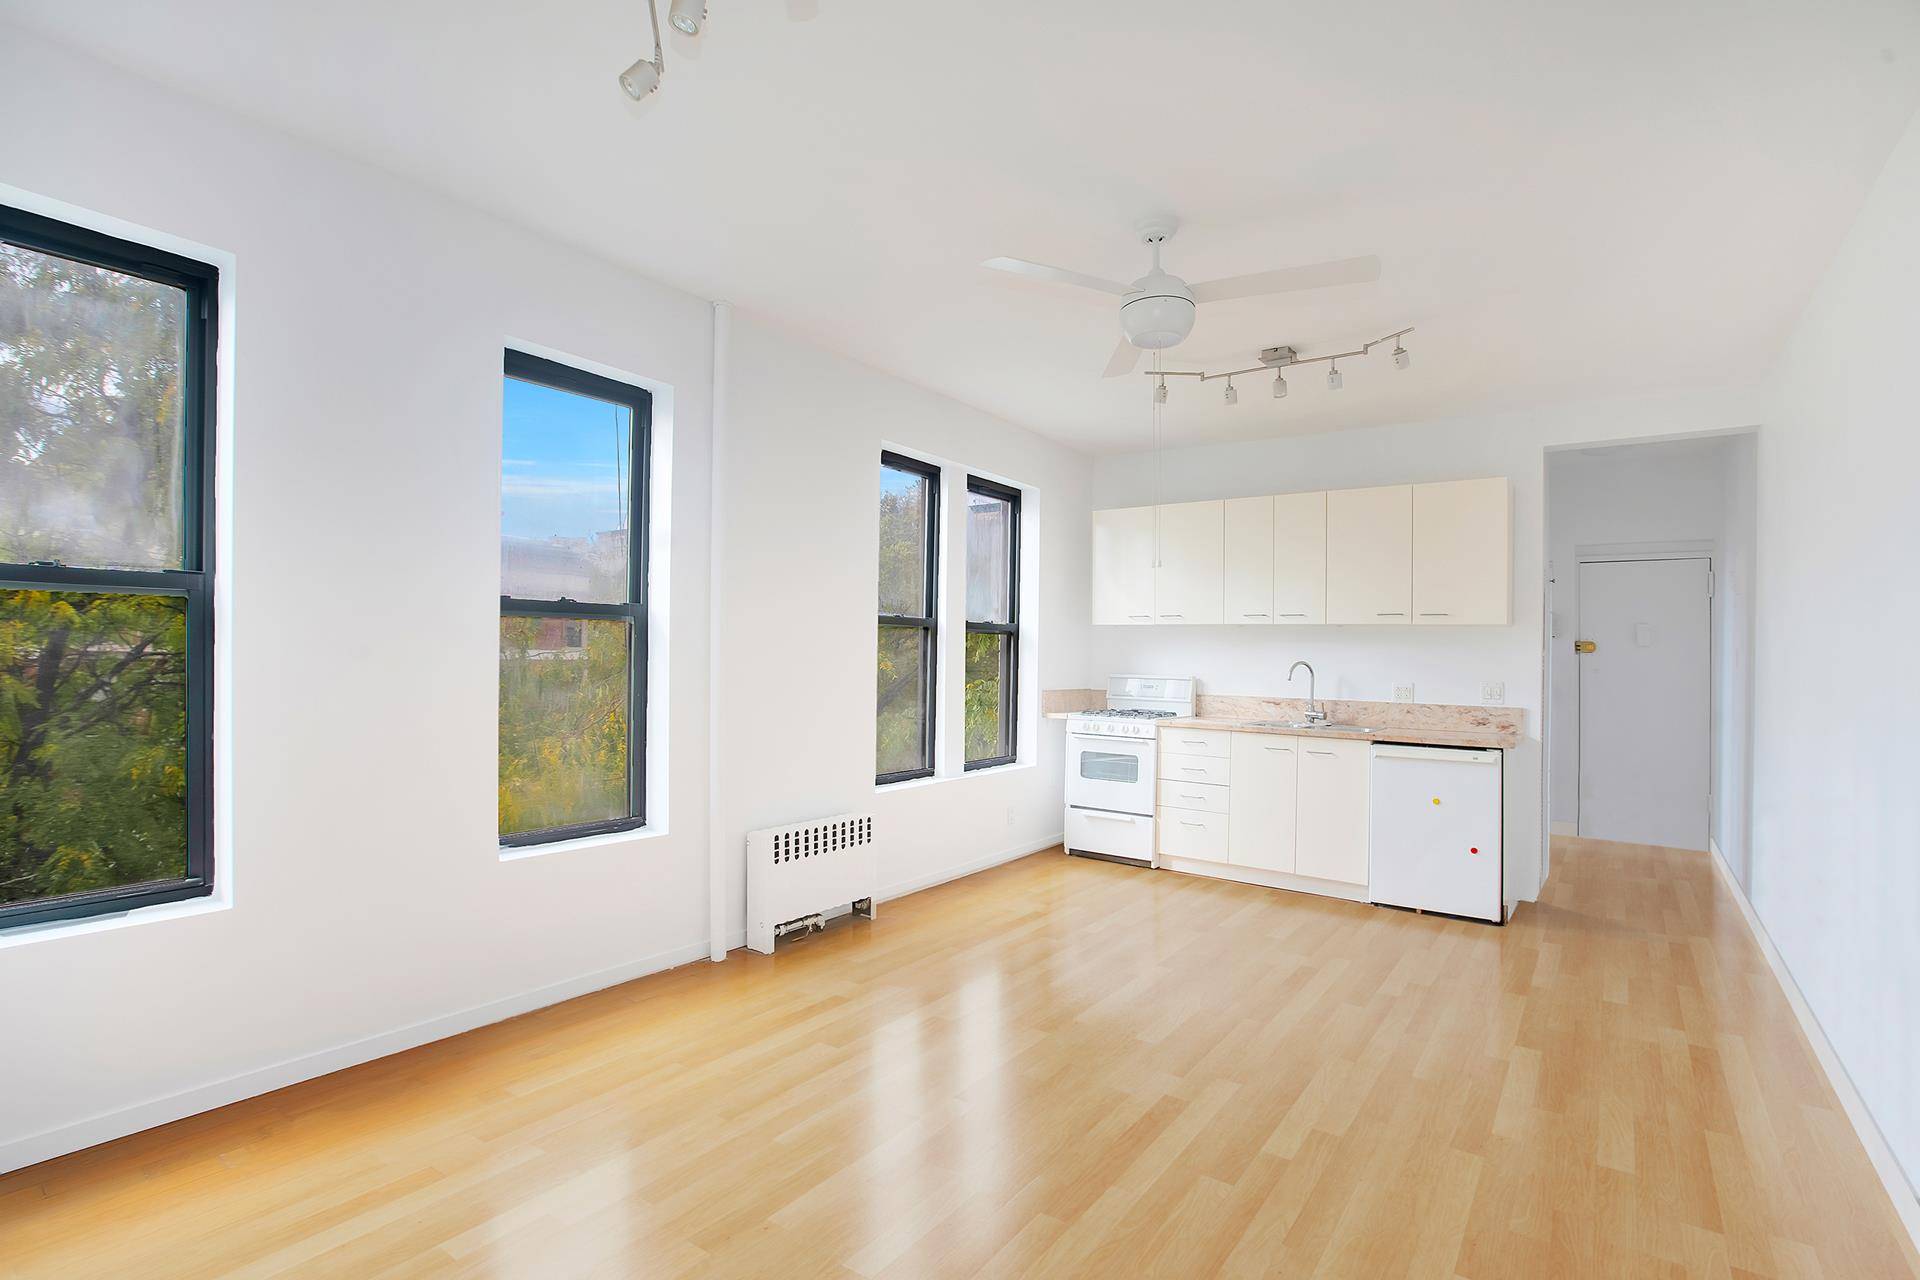 2BR 1 BA 4th Floor Walk Up in a pre war HDFC co op on Bradhurst Avenue with southern and eastern exposures overlooking and facing the expansive and peaceful Jackie ...